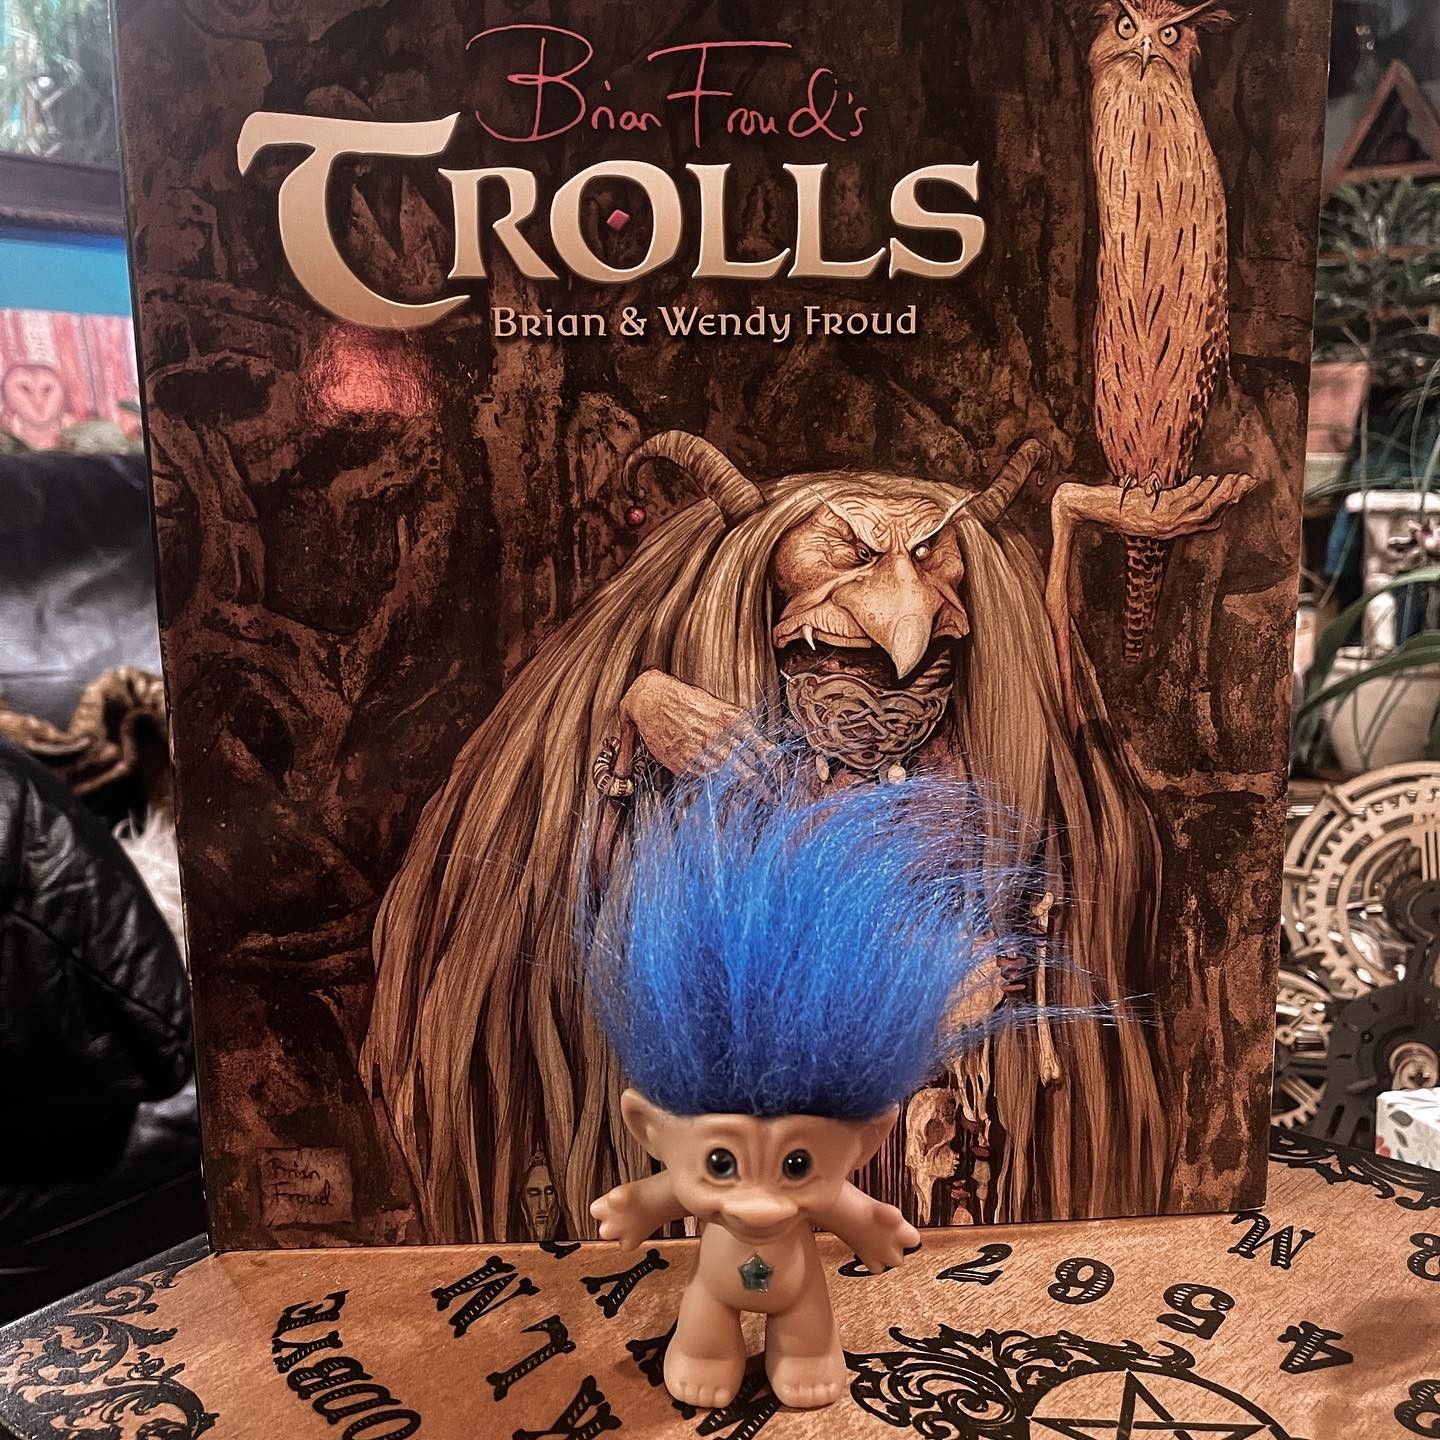 I once told @mr.devinhunter @faerywolf and @modernconjure about how when I was about three years old I was obsessed with treasure trolls (the old school ones not the newer weird ones) and how one day my step father sold every single one of my toys and my brother’s toys while we were sleeping one night for his addiction to the neighbor (who was his dealer and whose kids were our friends) and I had to watch them play with our toys and couldn’t do anything about it and how much it broke my little child heart to lose my beloved trolls. So among the holiday gifts I receive from from the guys this year were some of the classic treasure trolls, which is one of the sweetest and most thoughtful gifts anyone has ever given me. 

Also pictured is Brian Froud’s Trolls book because it seemed fitting. I’m a huge fan of his work and collect his books and oracle decks and such.